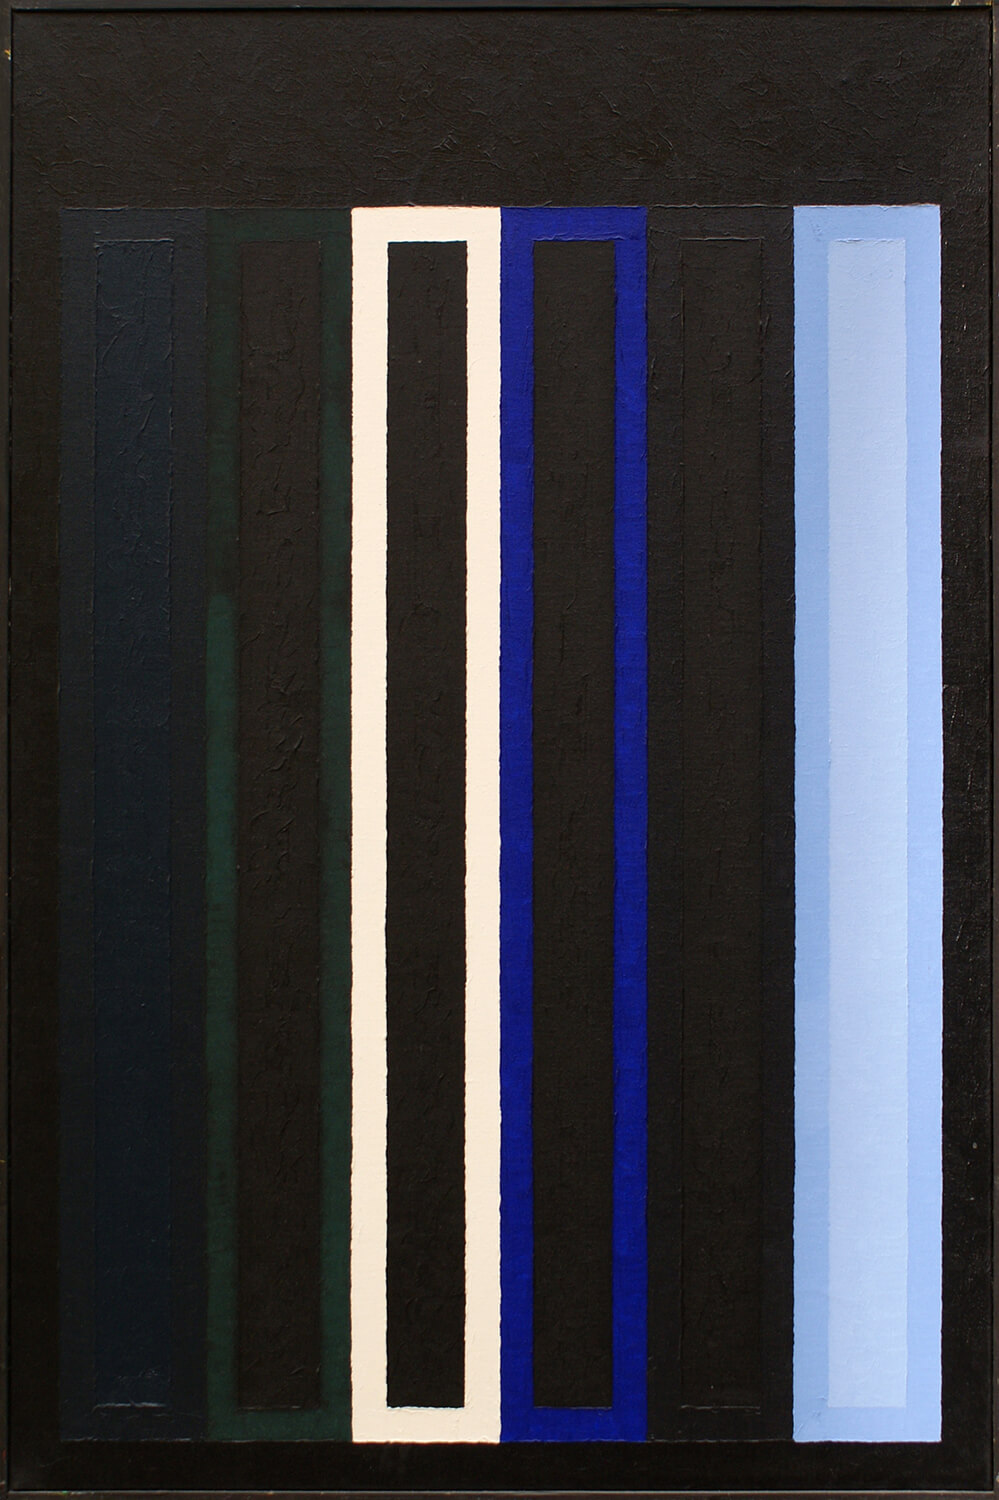 Peter Benkert, Untitled 1 (five-part series), 1977, acrylic on canvas, 90 x 60 cm